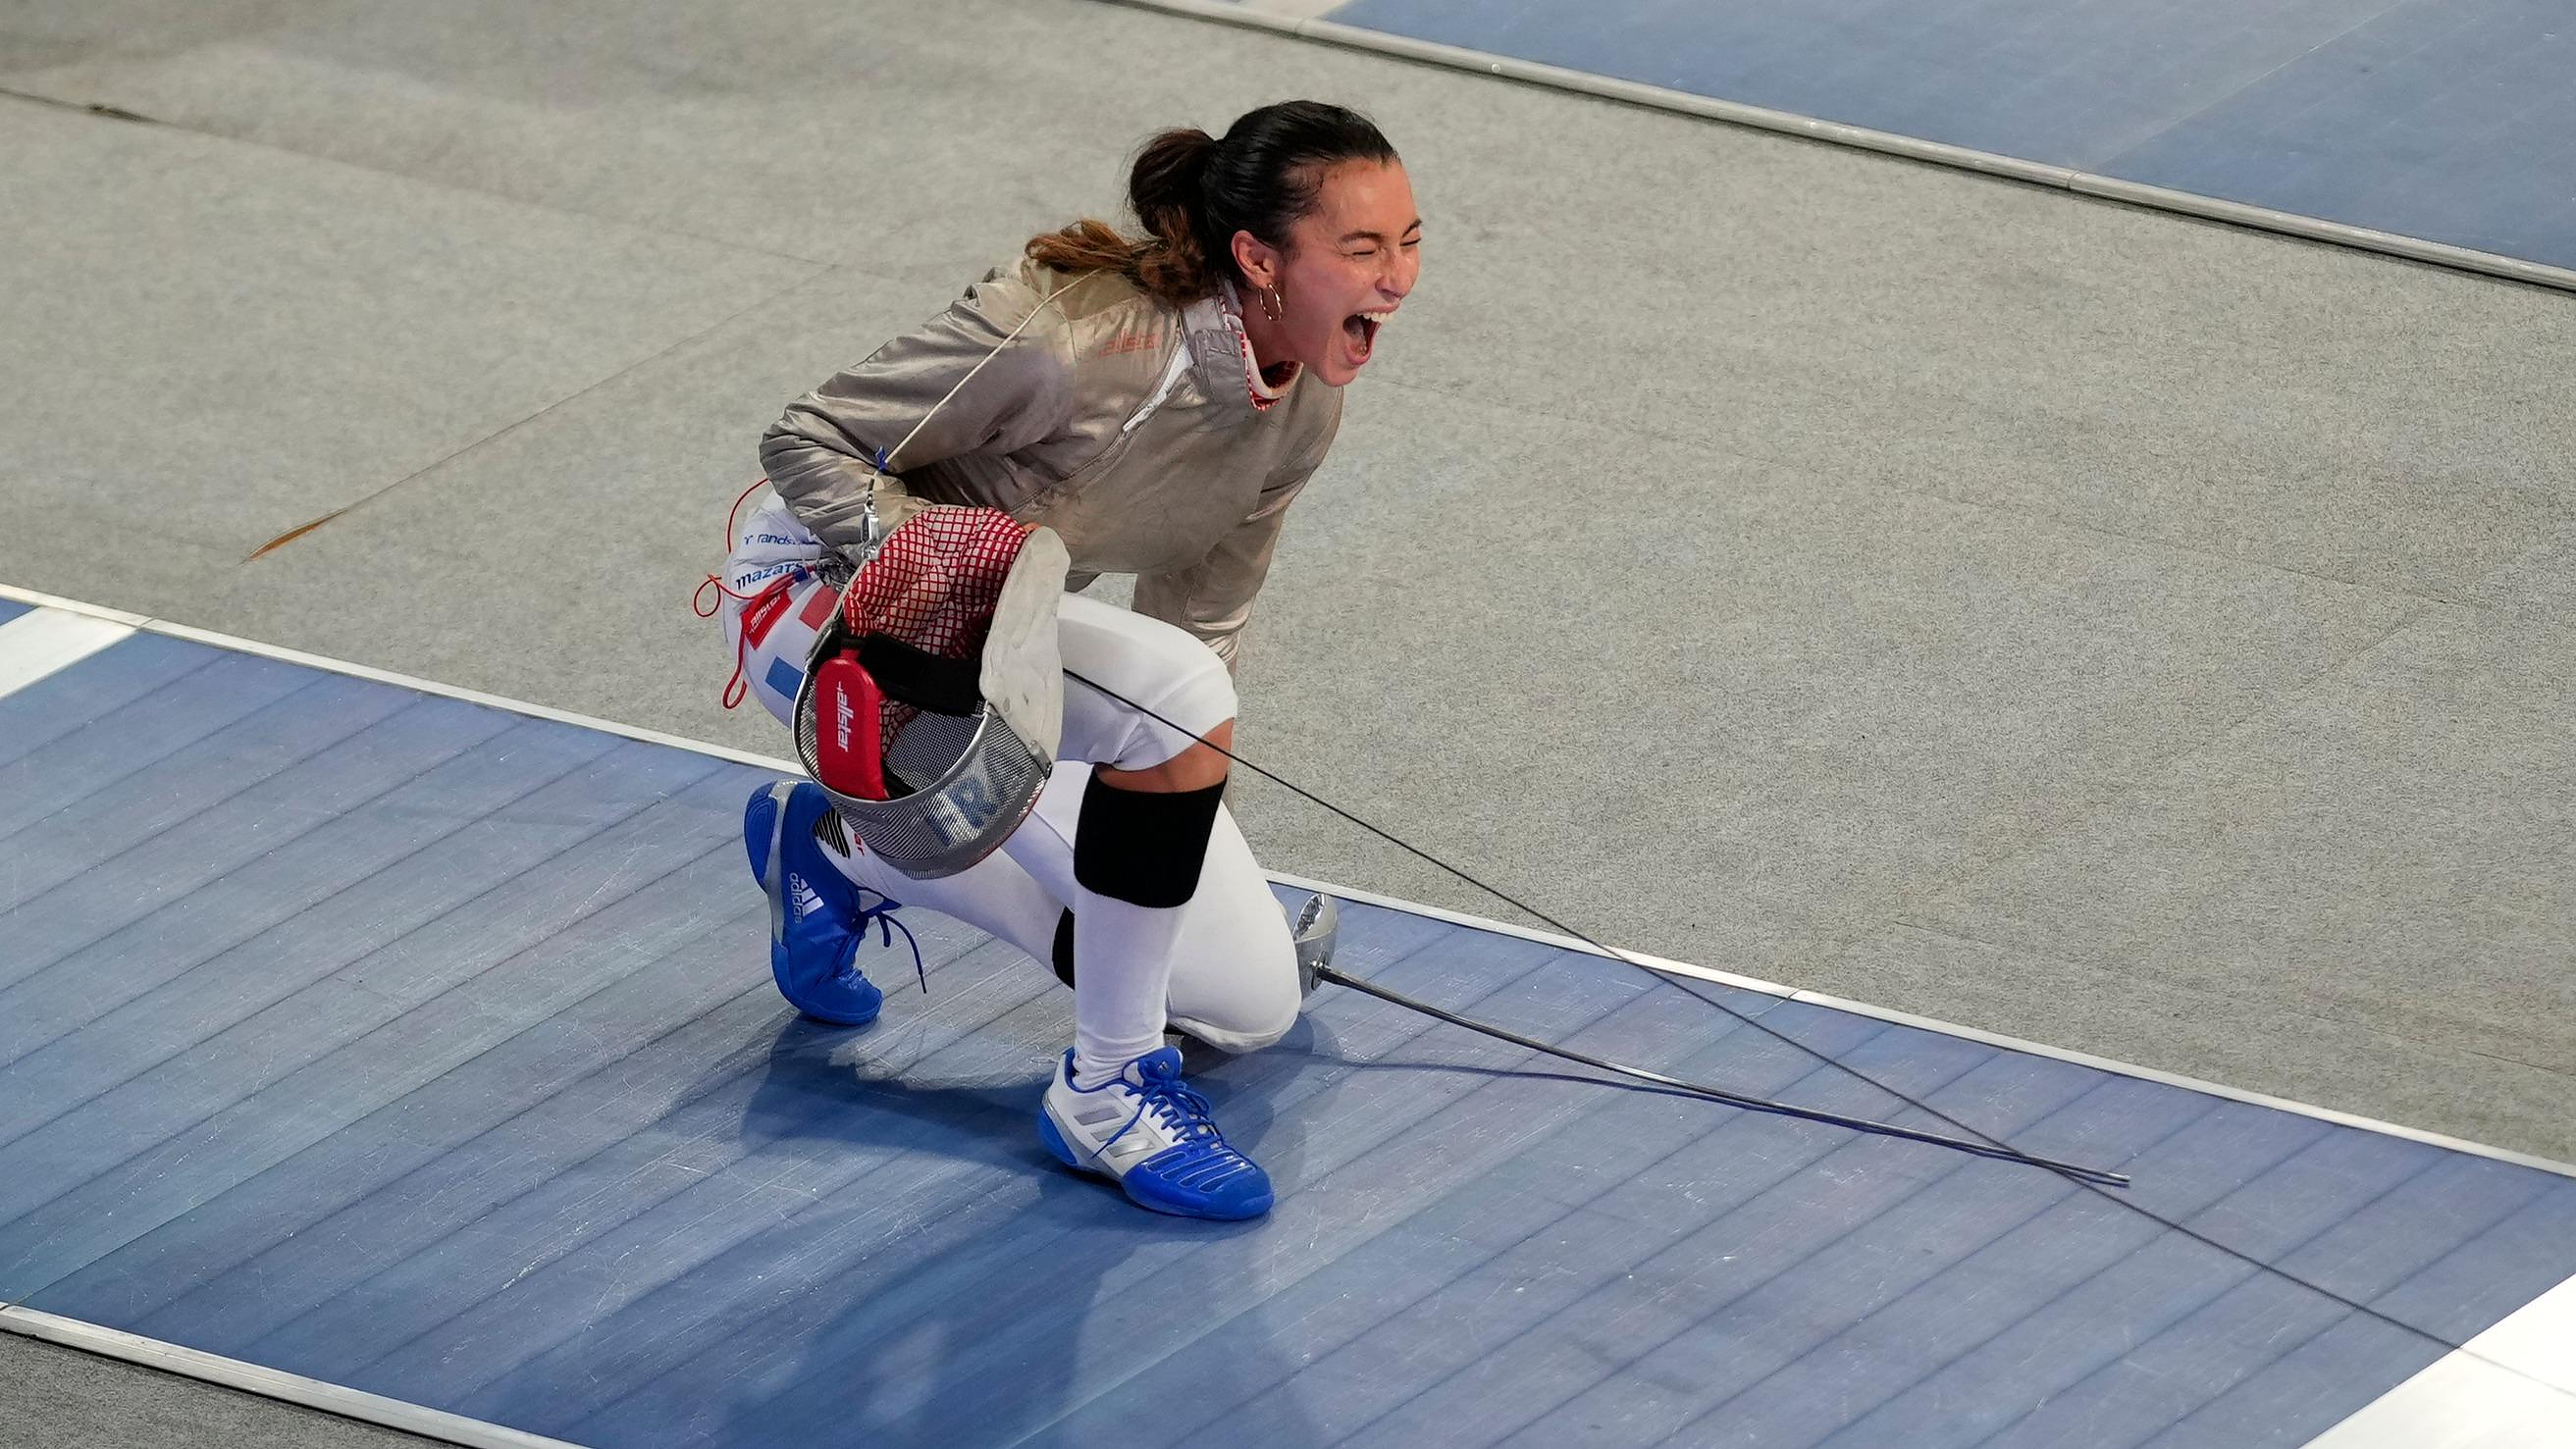 Fencing: the Bleues du sabre victorious in Athens in the World Cup